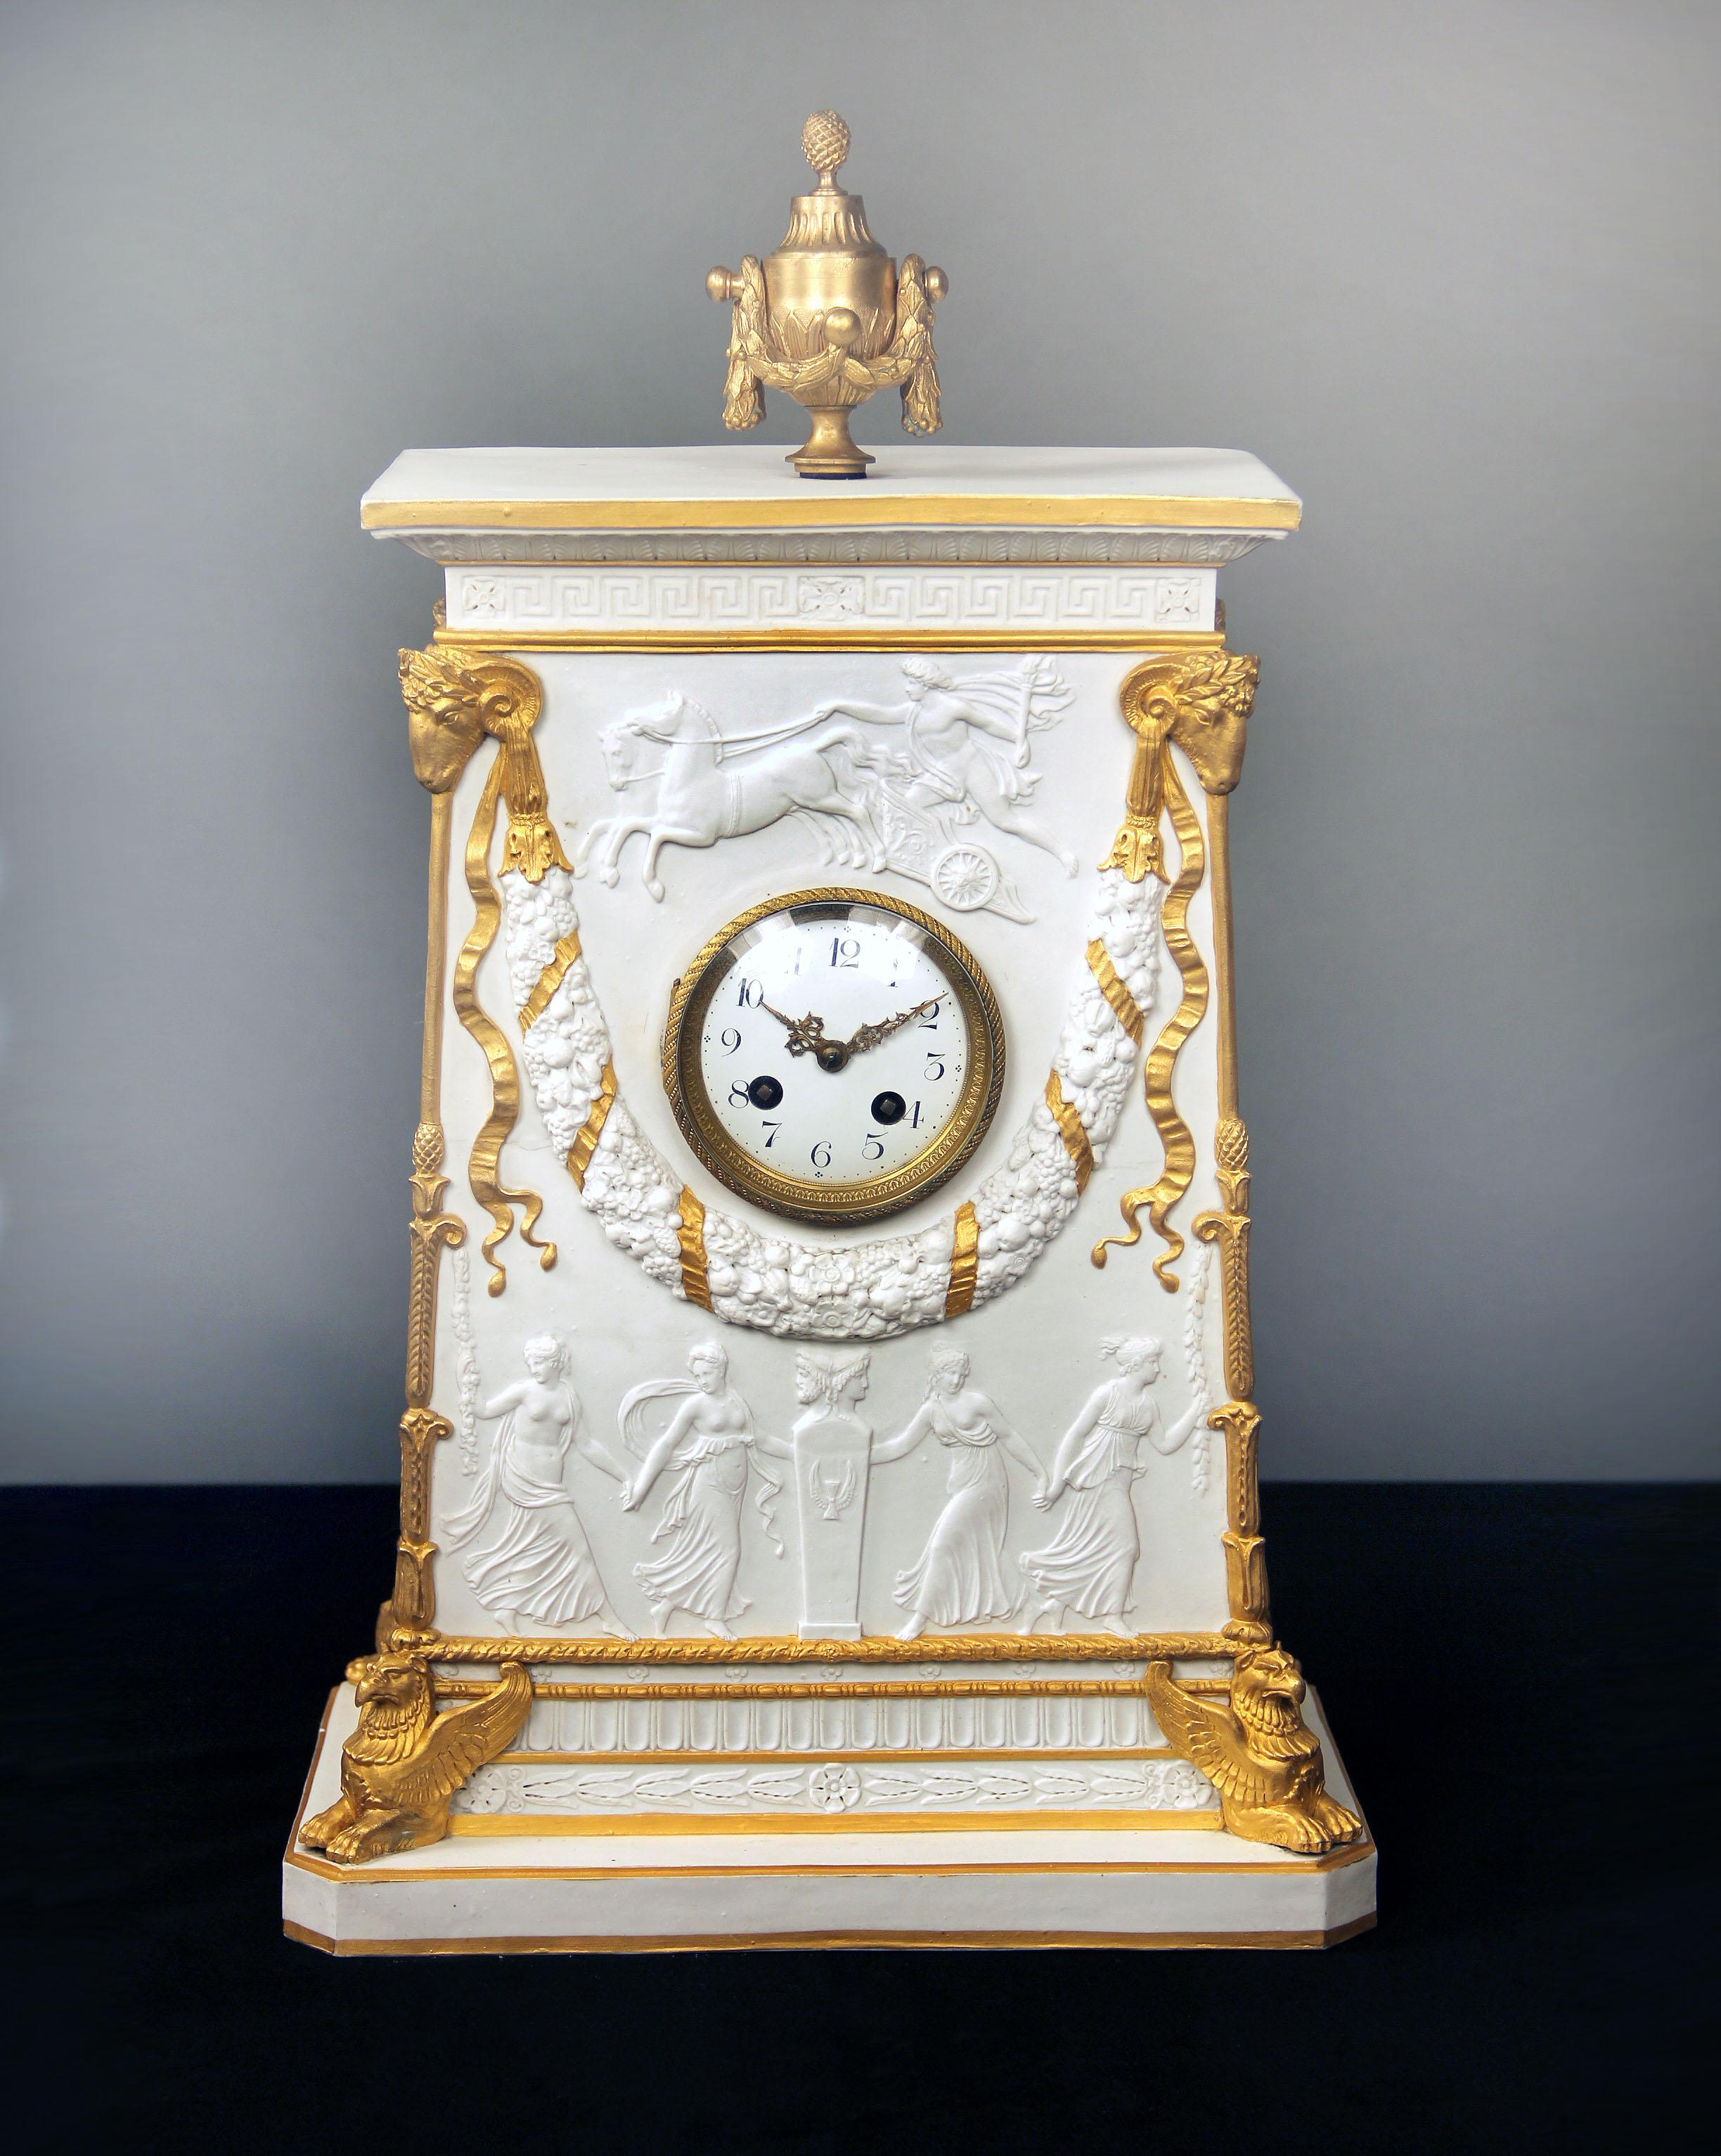 A beautifully design late 19th century gilt bronze mounted parcel-gilt and biscuit porcelain mantel (fireplace) clock

The front carved with Apollo riding his chariot. The bottom with dancing maidens, the top corners with gilded ram heads, the